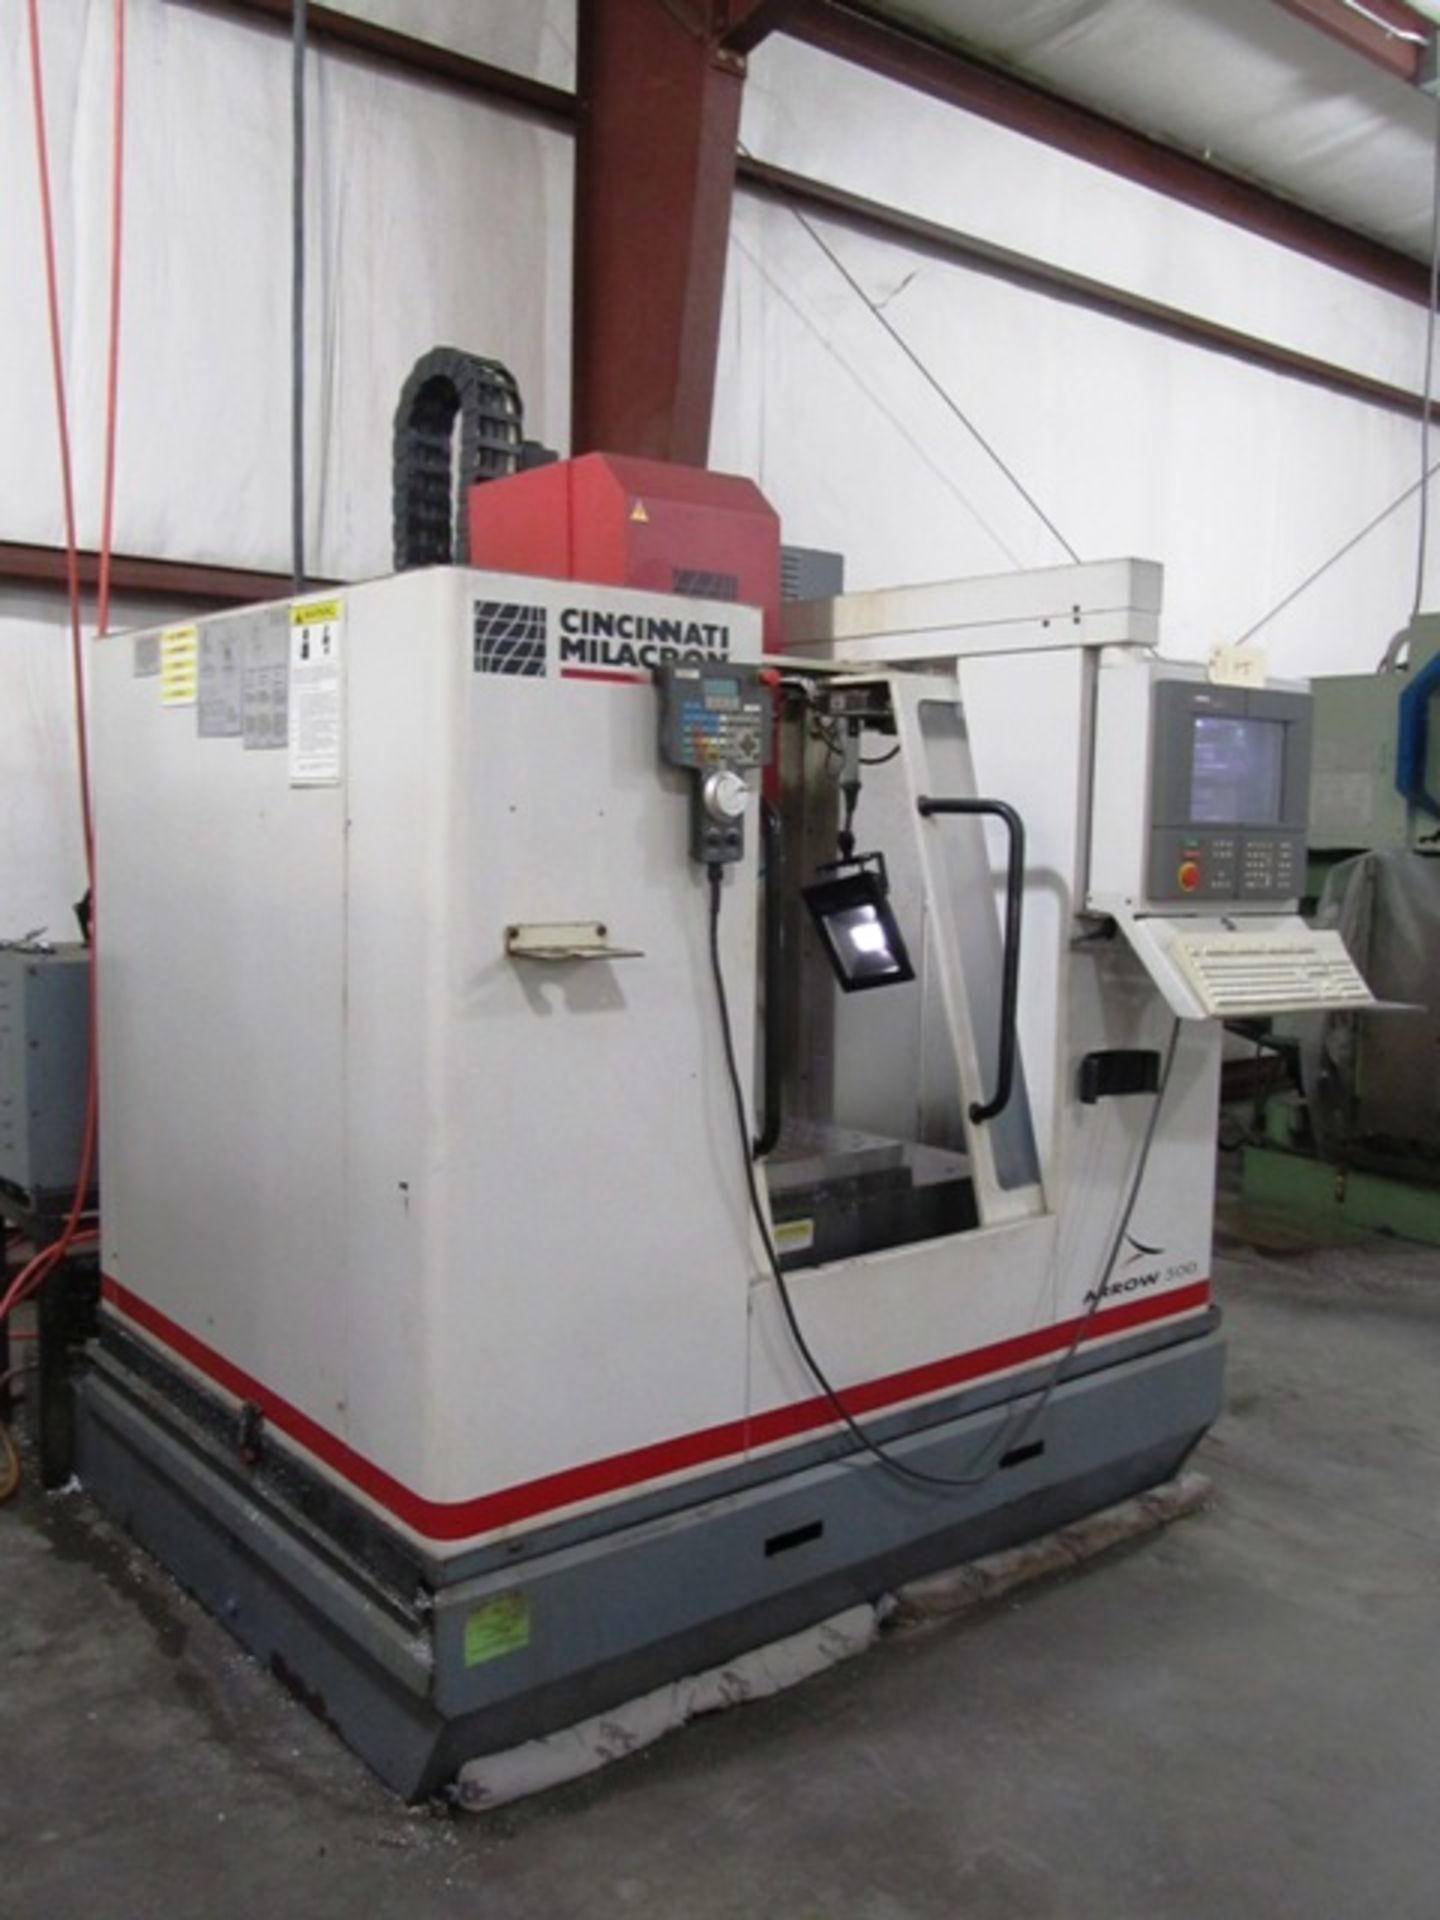 Cincinnati Milacron Arrow 500 Vertical Machining Center with 20.5'' x 27.5'' Table, 40 Taper Spindle - Image 5 of 6